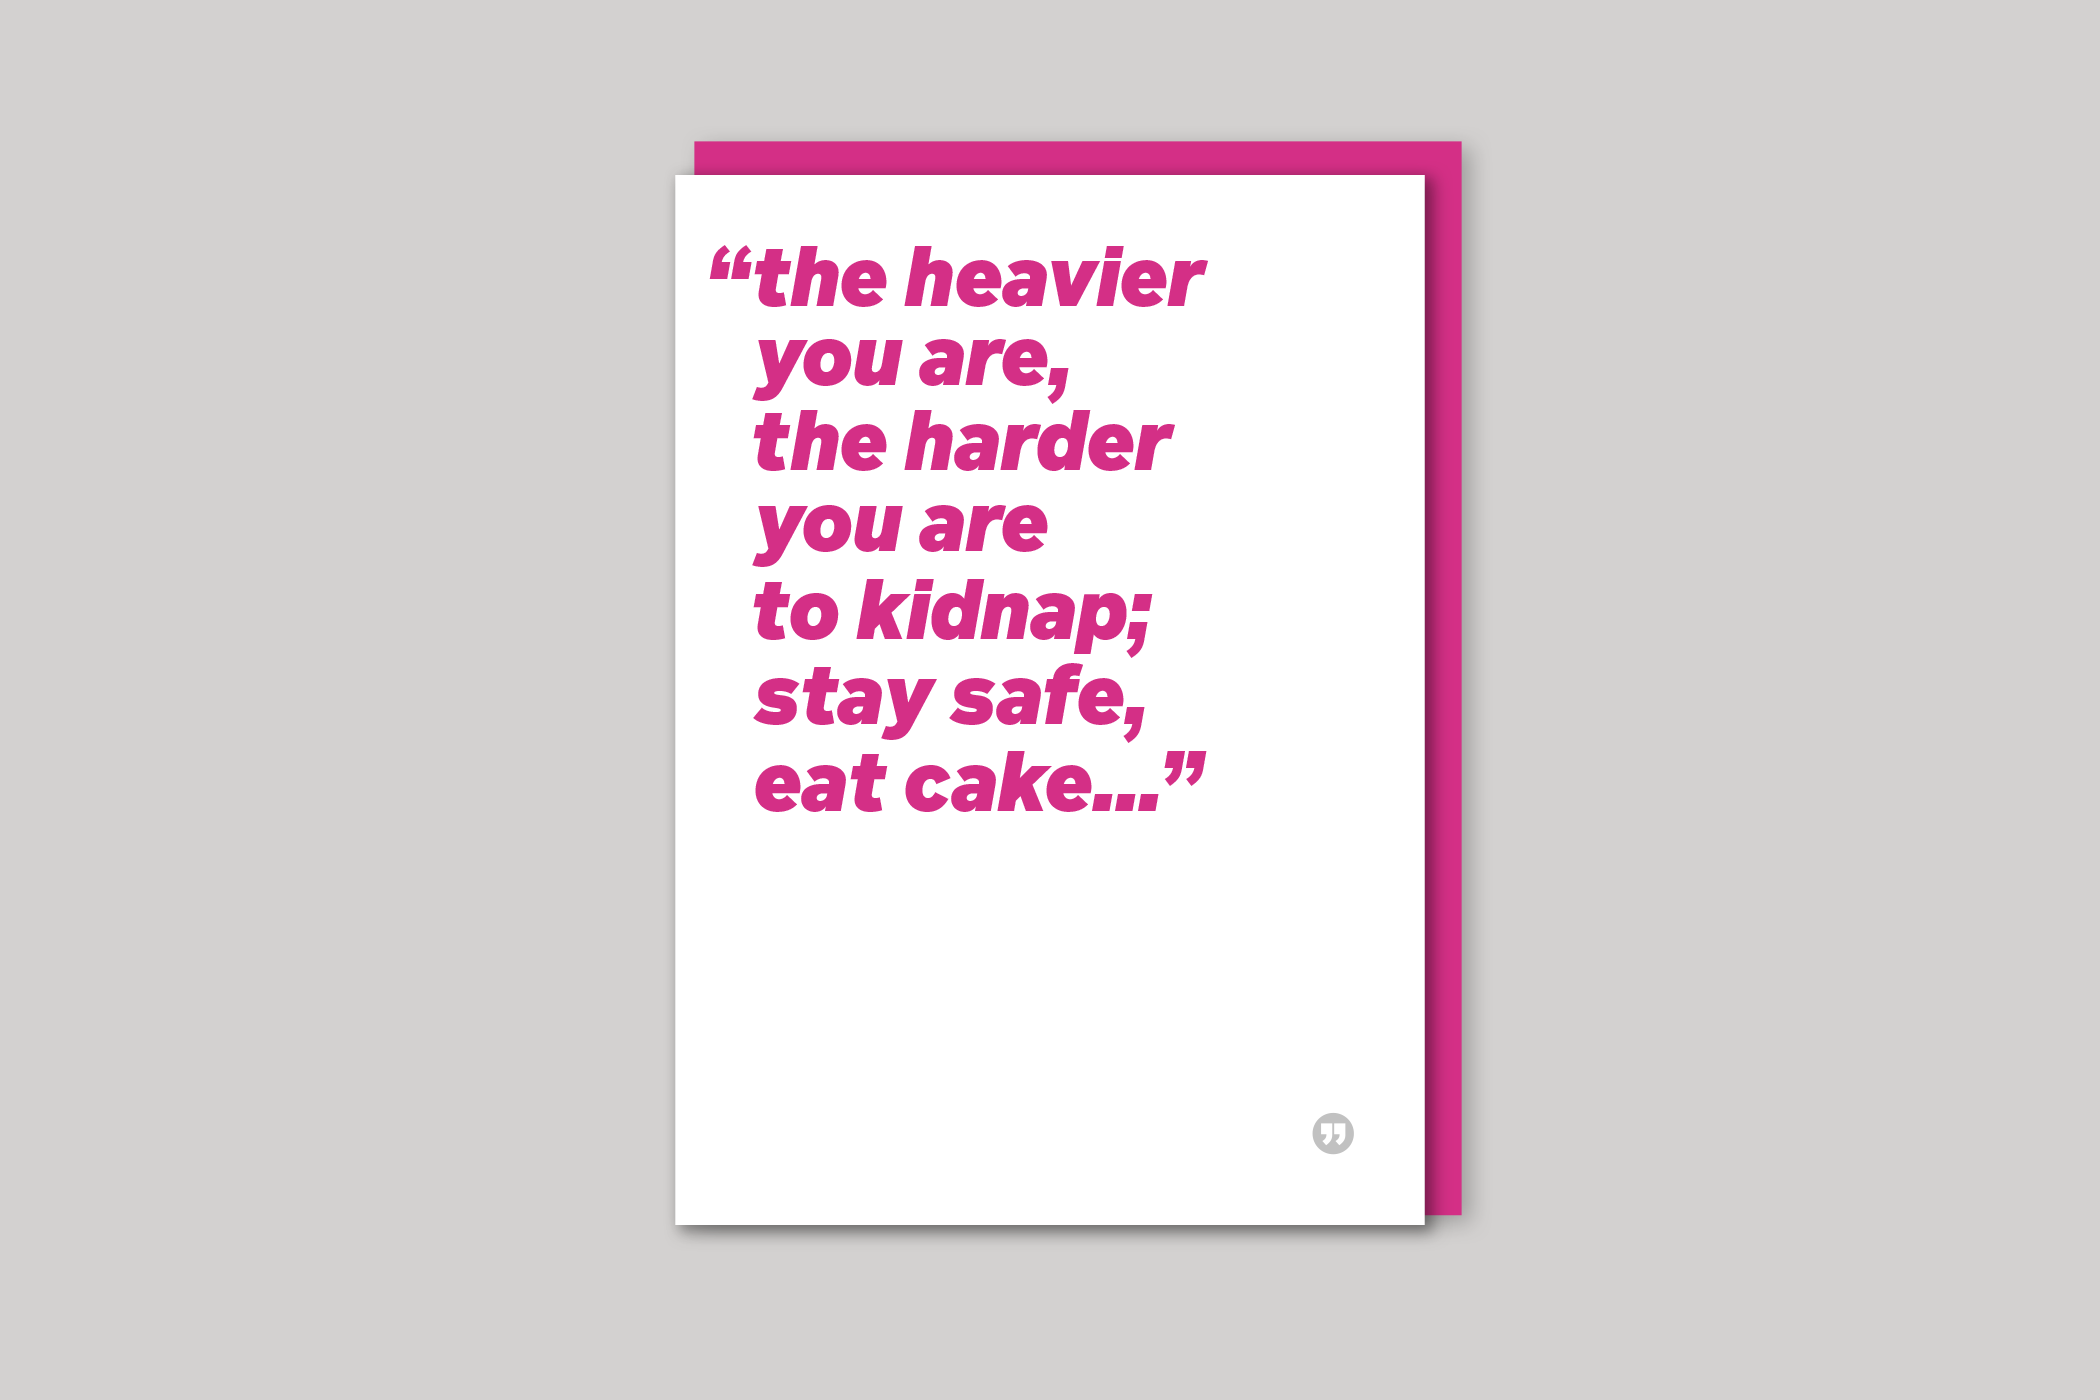 Stay Safe funny quotation from Quotecards range of cards by Icon, back page.